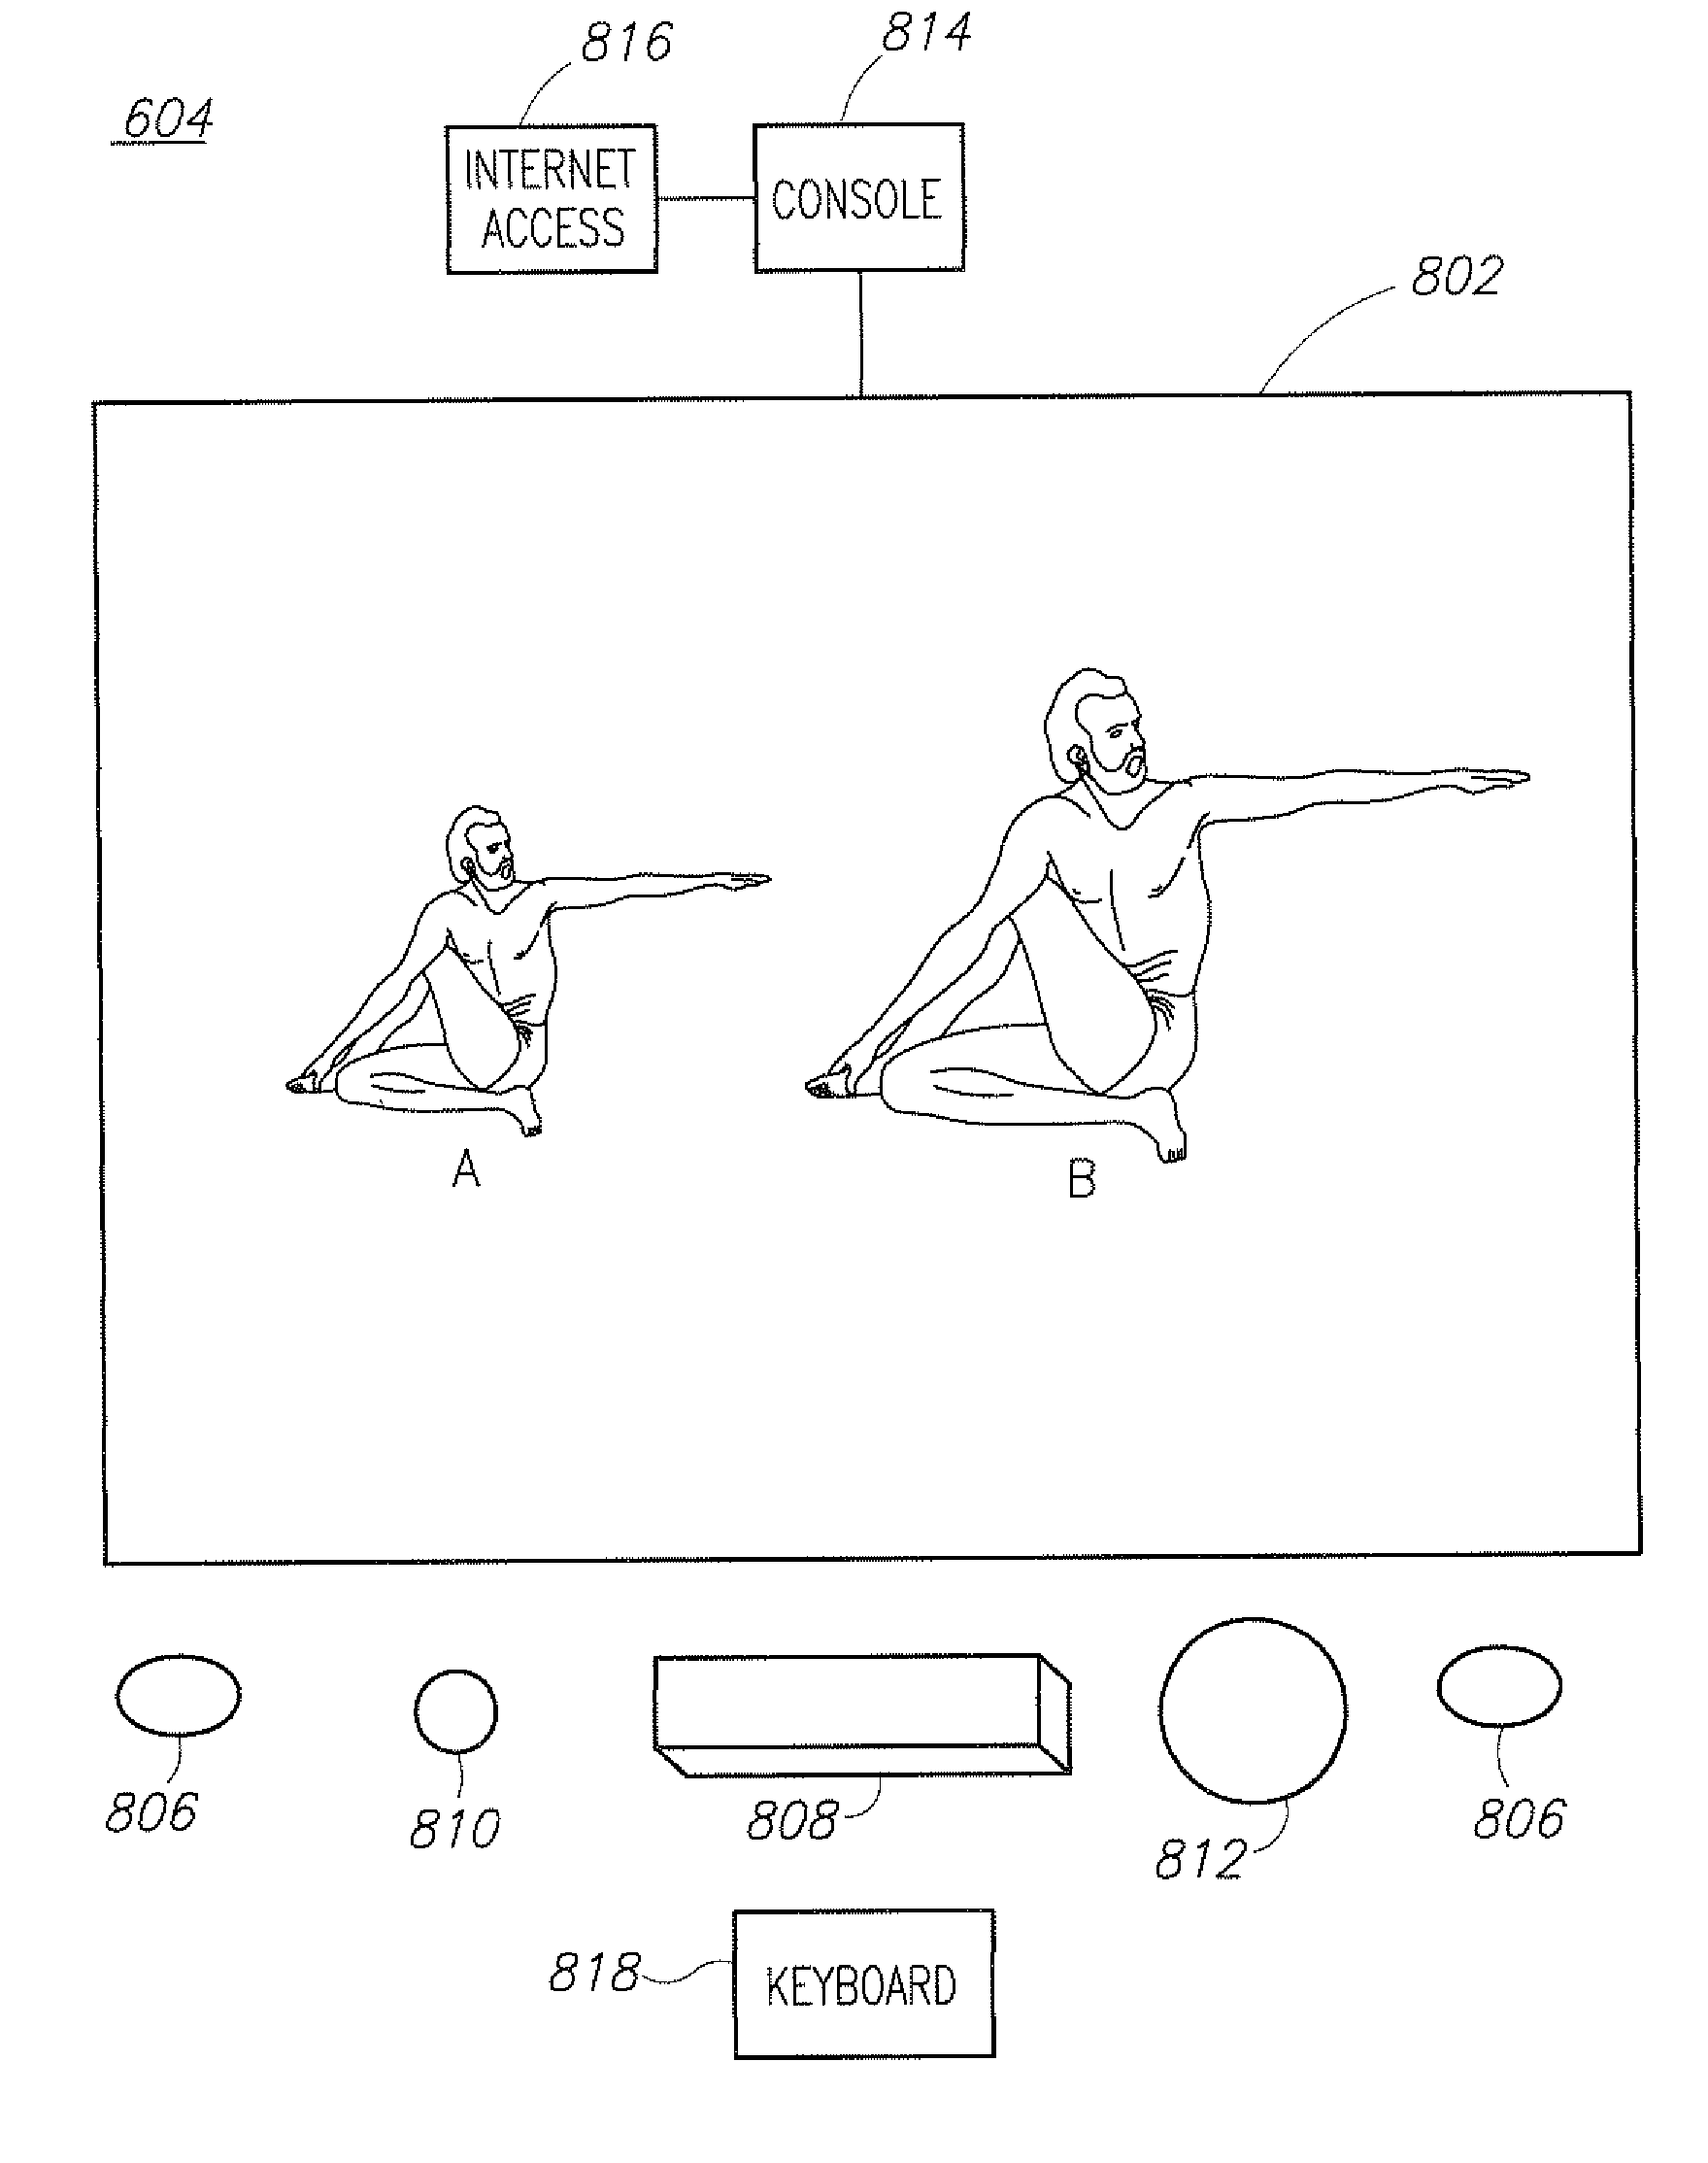 Method and apparatus for sharing a physical activity between several people